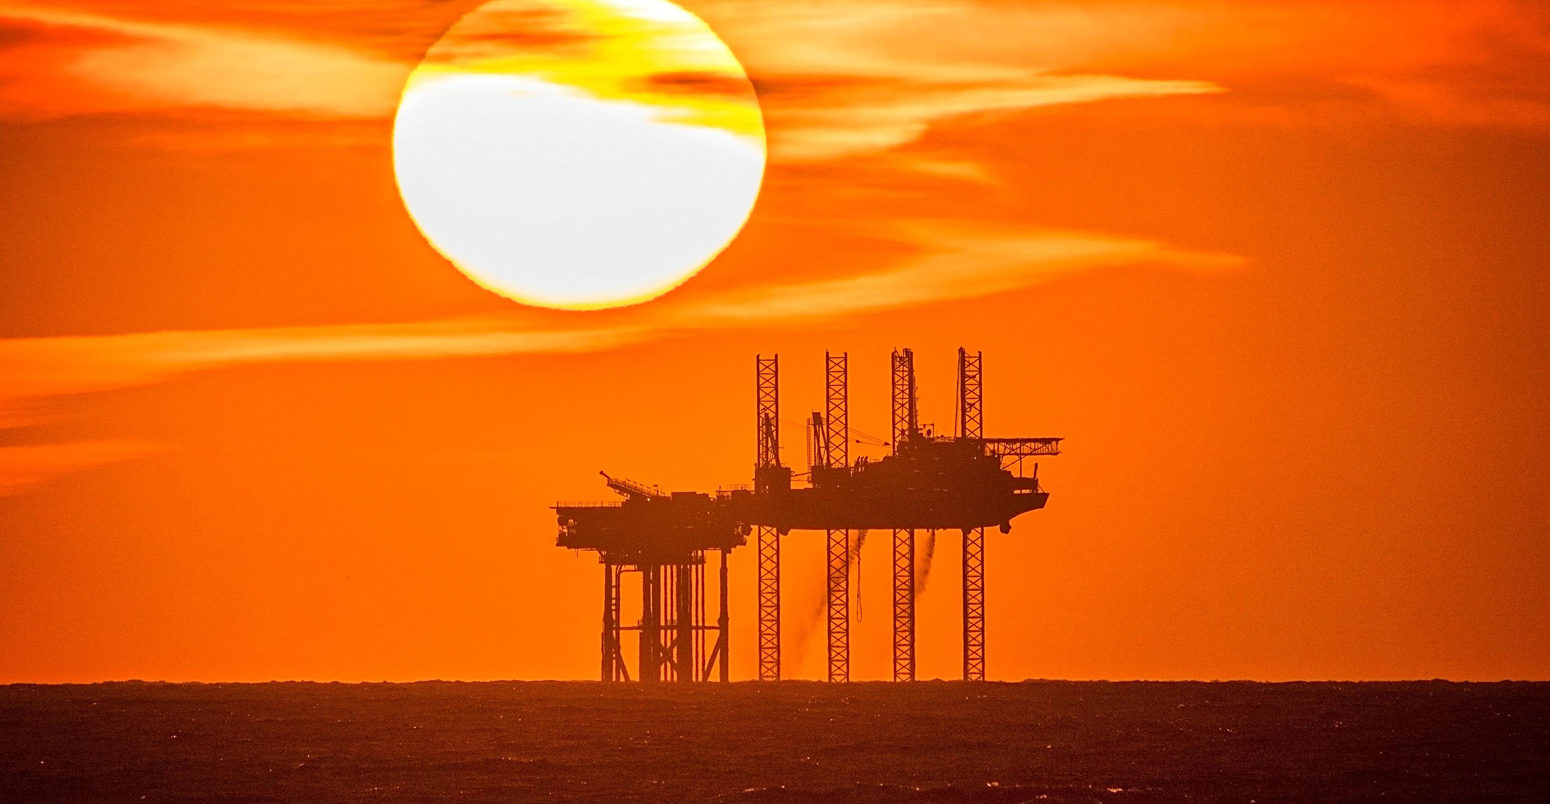 Sunset pours into the horizon behind the Hamilton Oil Rig off the Southport coastline, UK